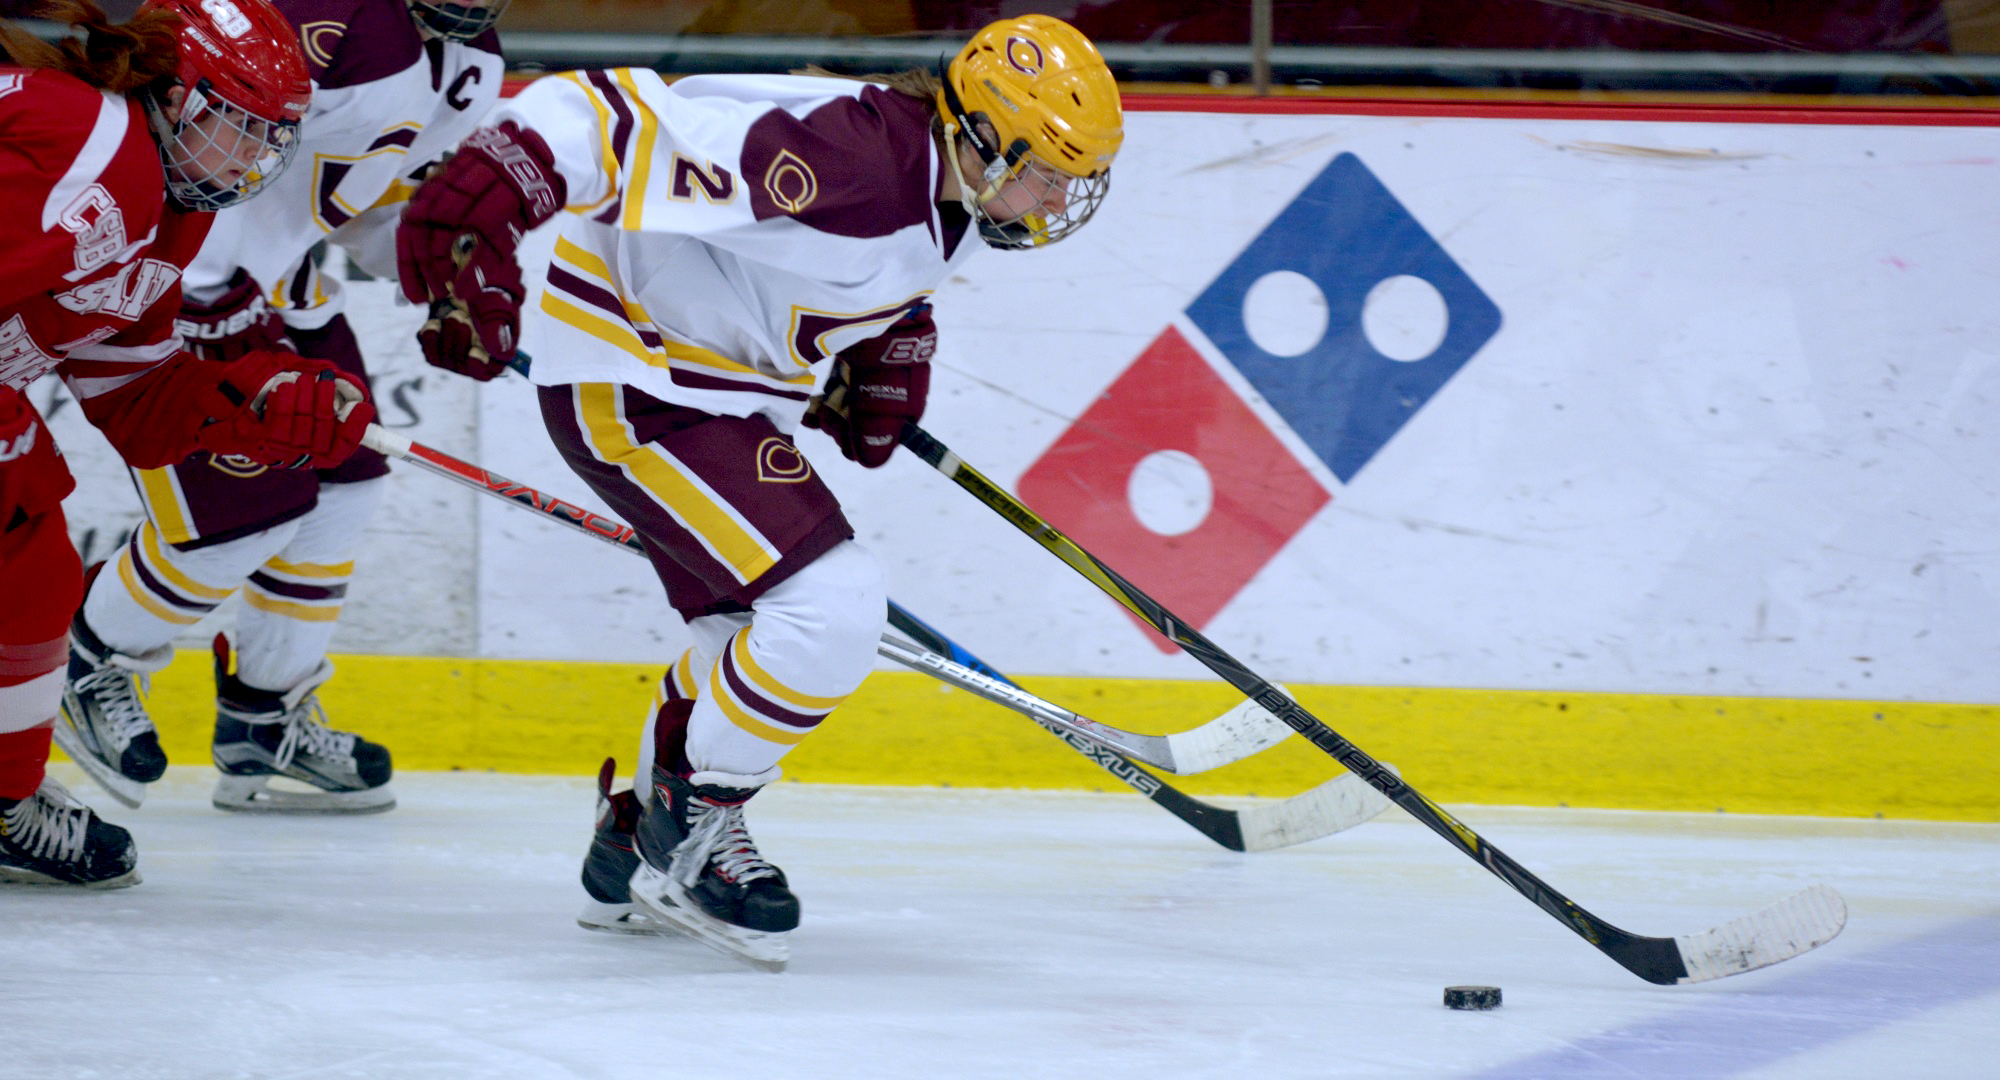 Junior Amanda Flemming recorded four points in the Cobbers' 7-4 win at Northland.